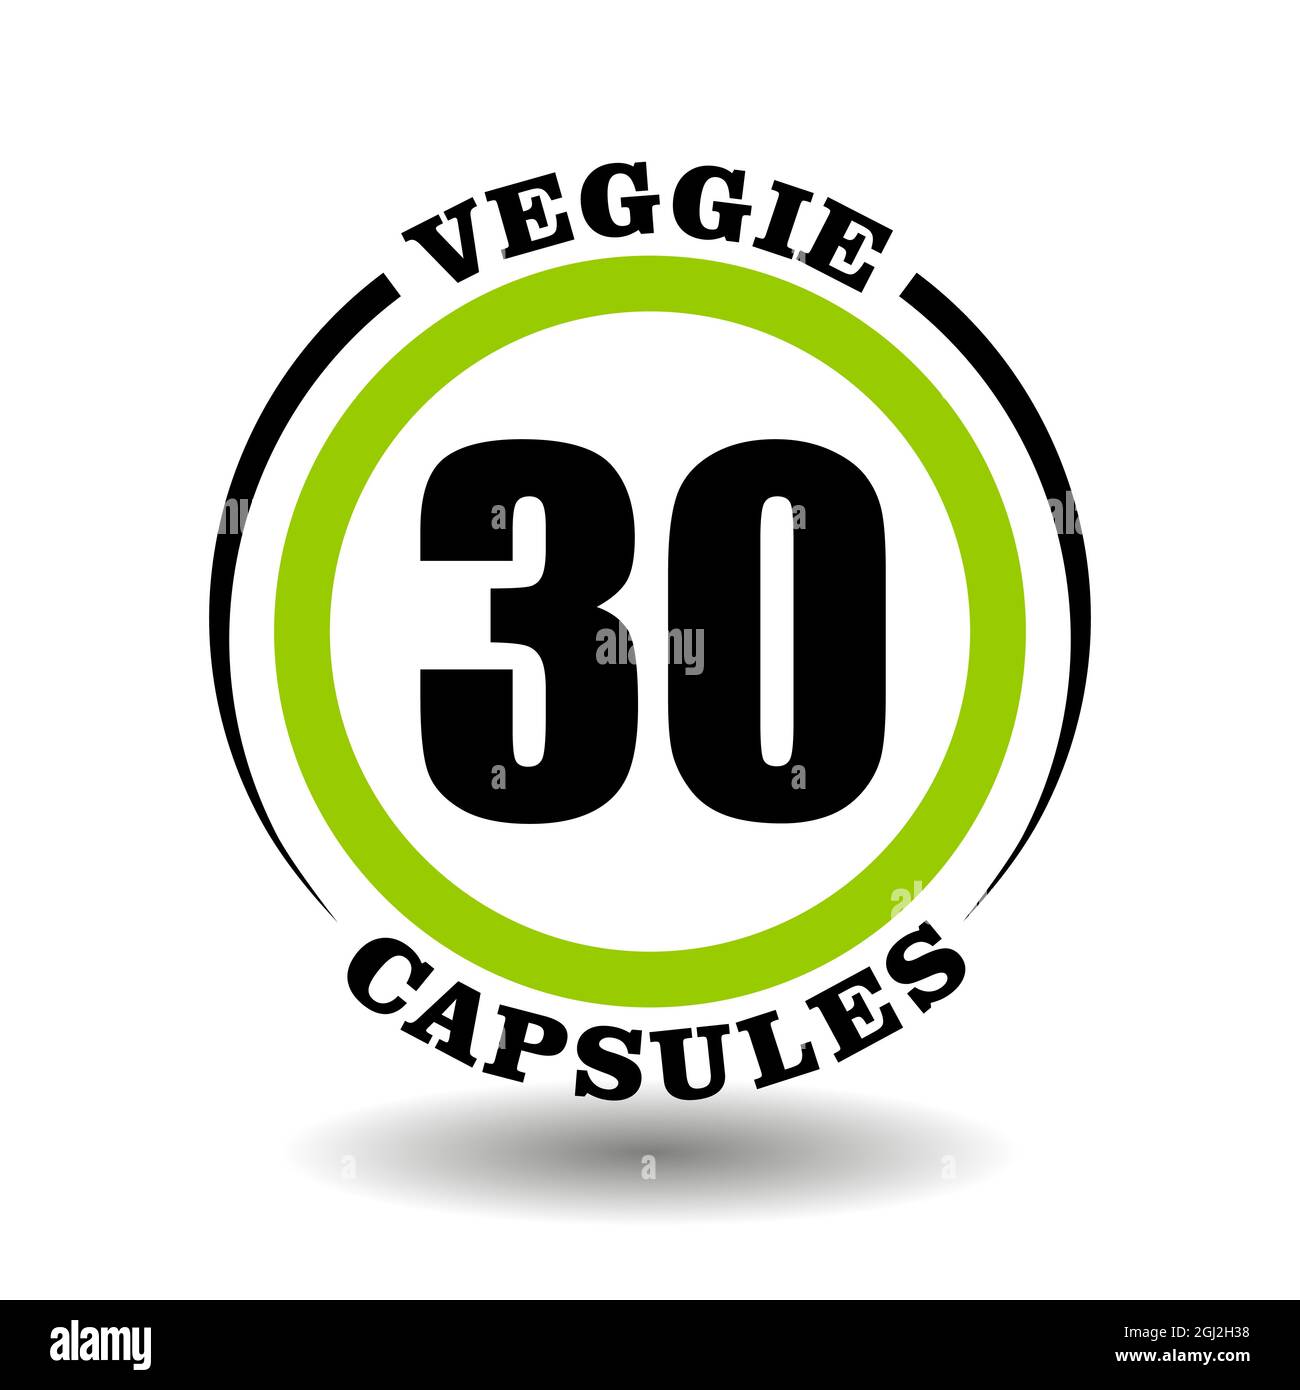 Circle vector icon Veggie capsules for labeling package of vegan products pictogram, vegetarian tablets logo, round eco pills symbols with natural pla Stock Vector